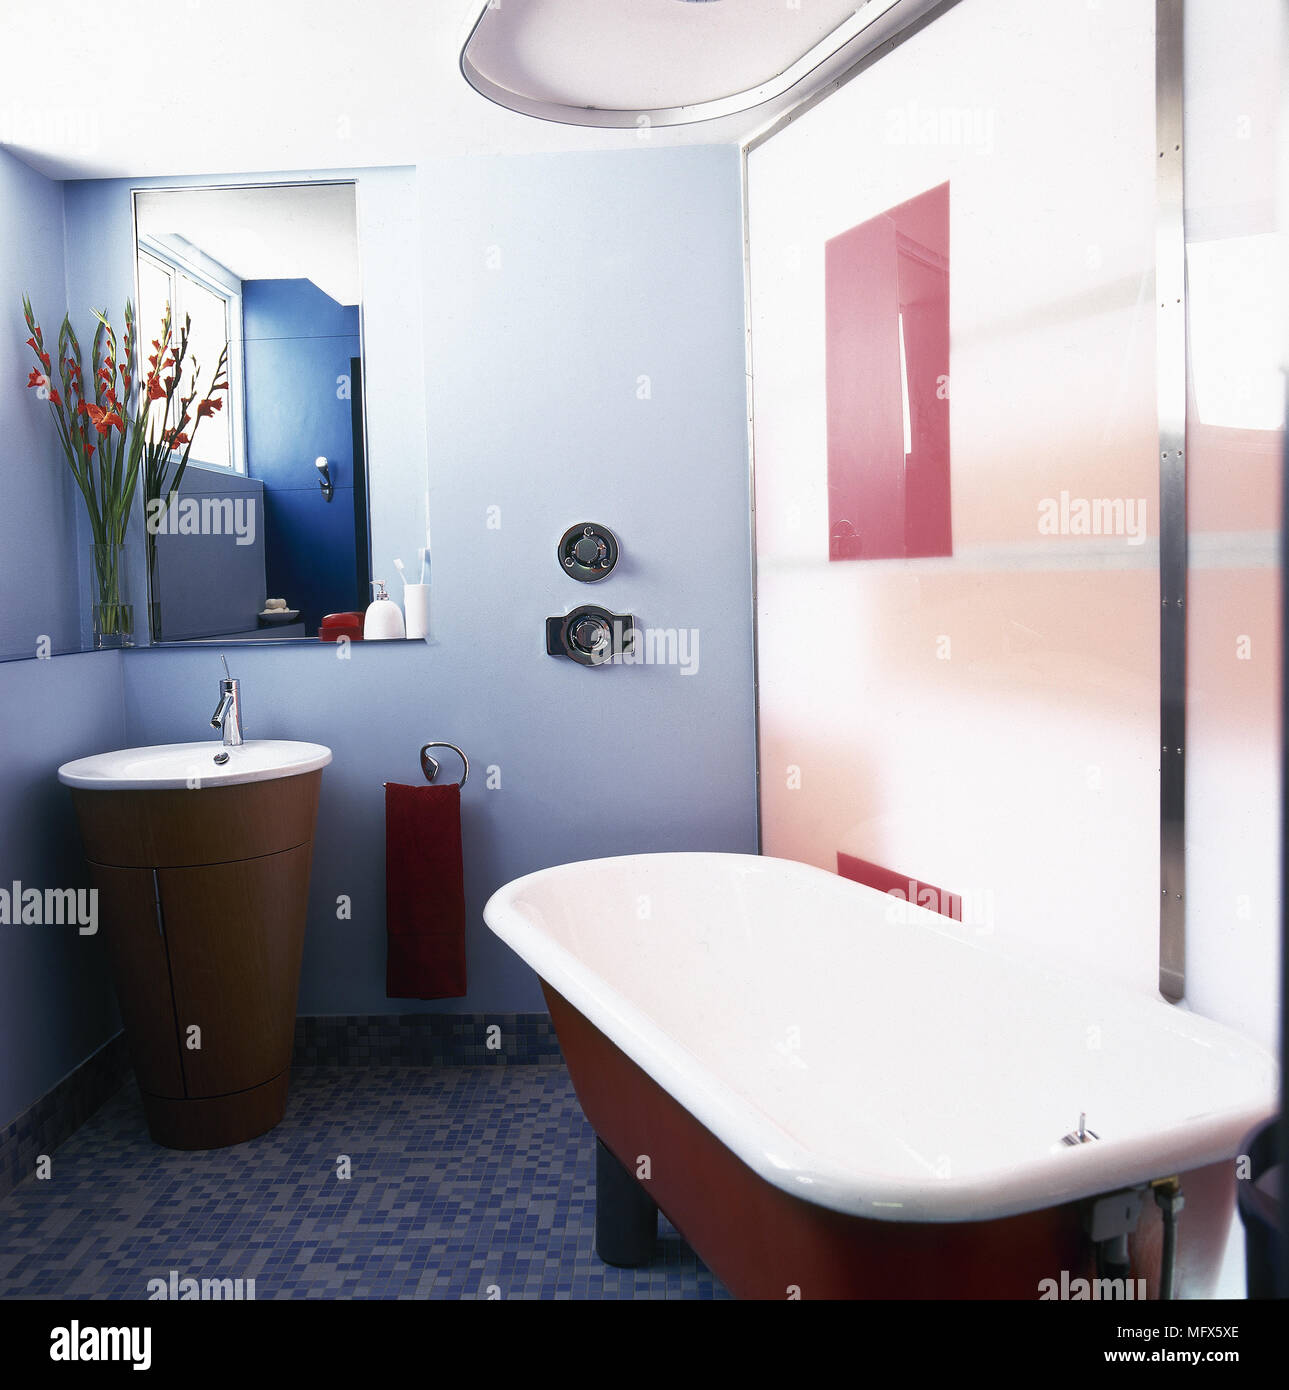 Modern, tiled bathroom with a roll top bathtub, blue accent wall, and a washbasin in a cylindrical cabinet. Stock Photo